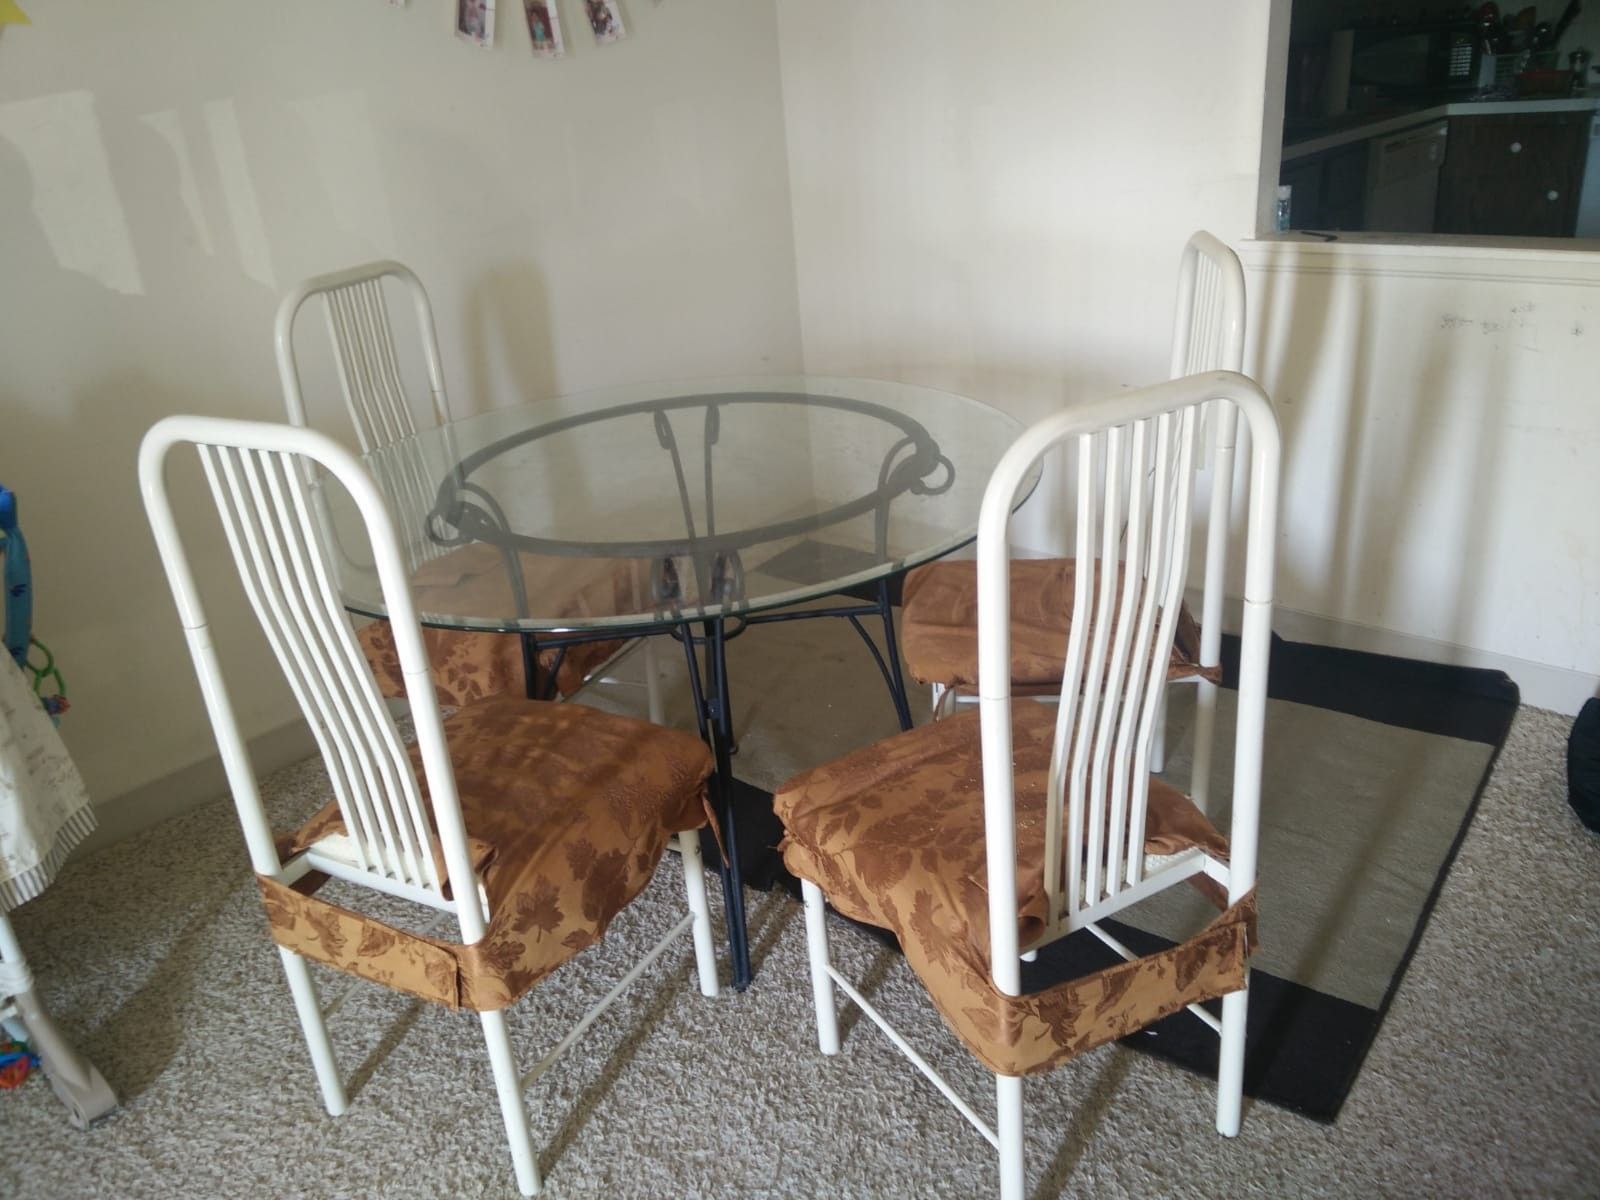 Round Glass Table with 4 Chairs